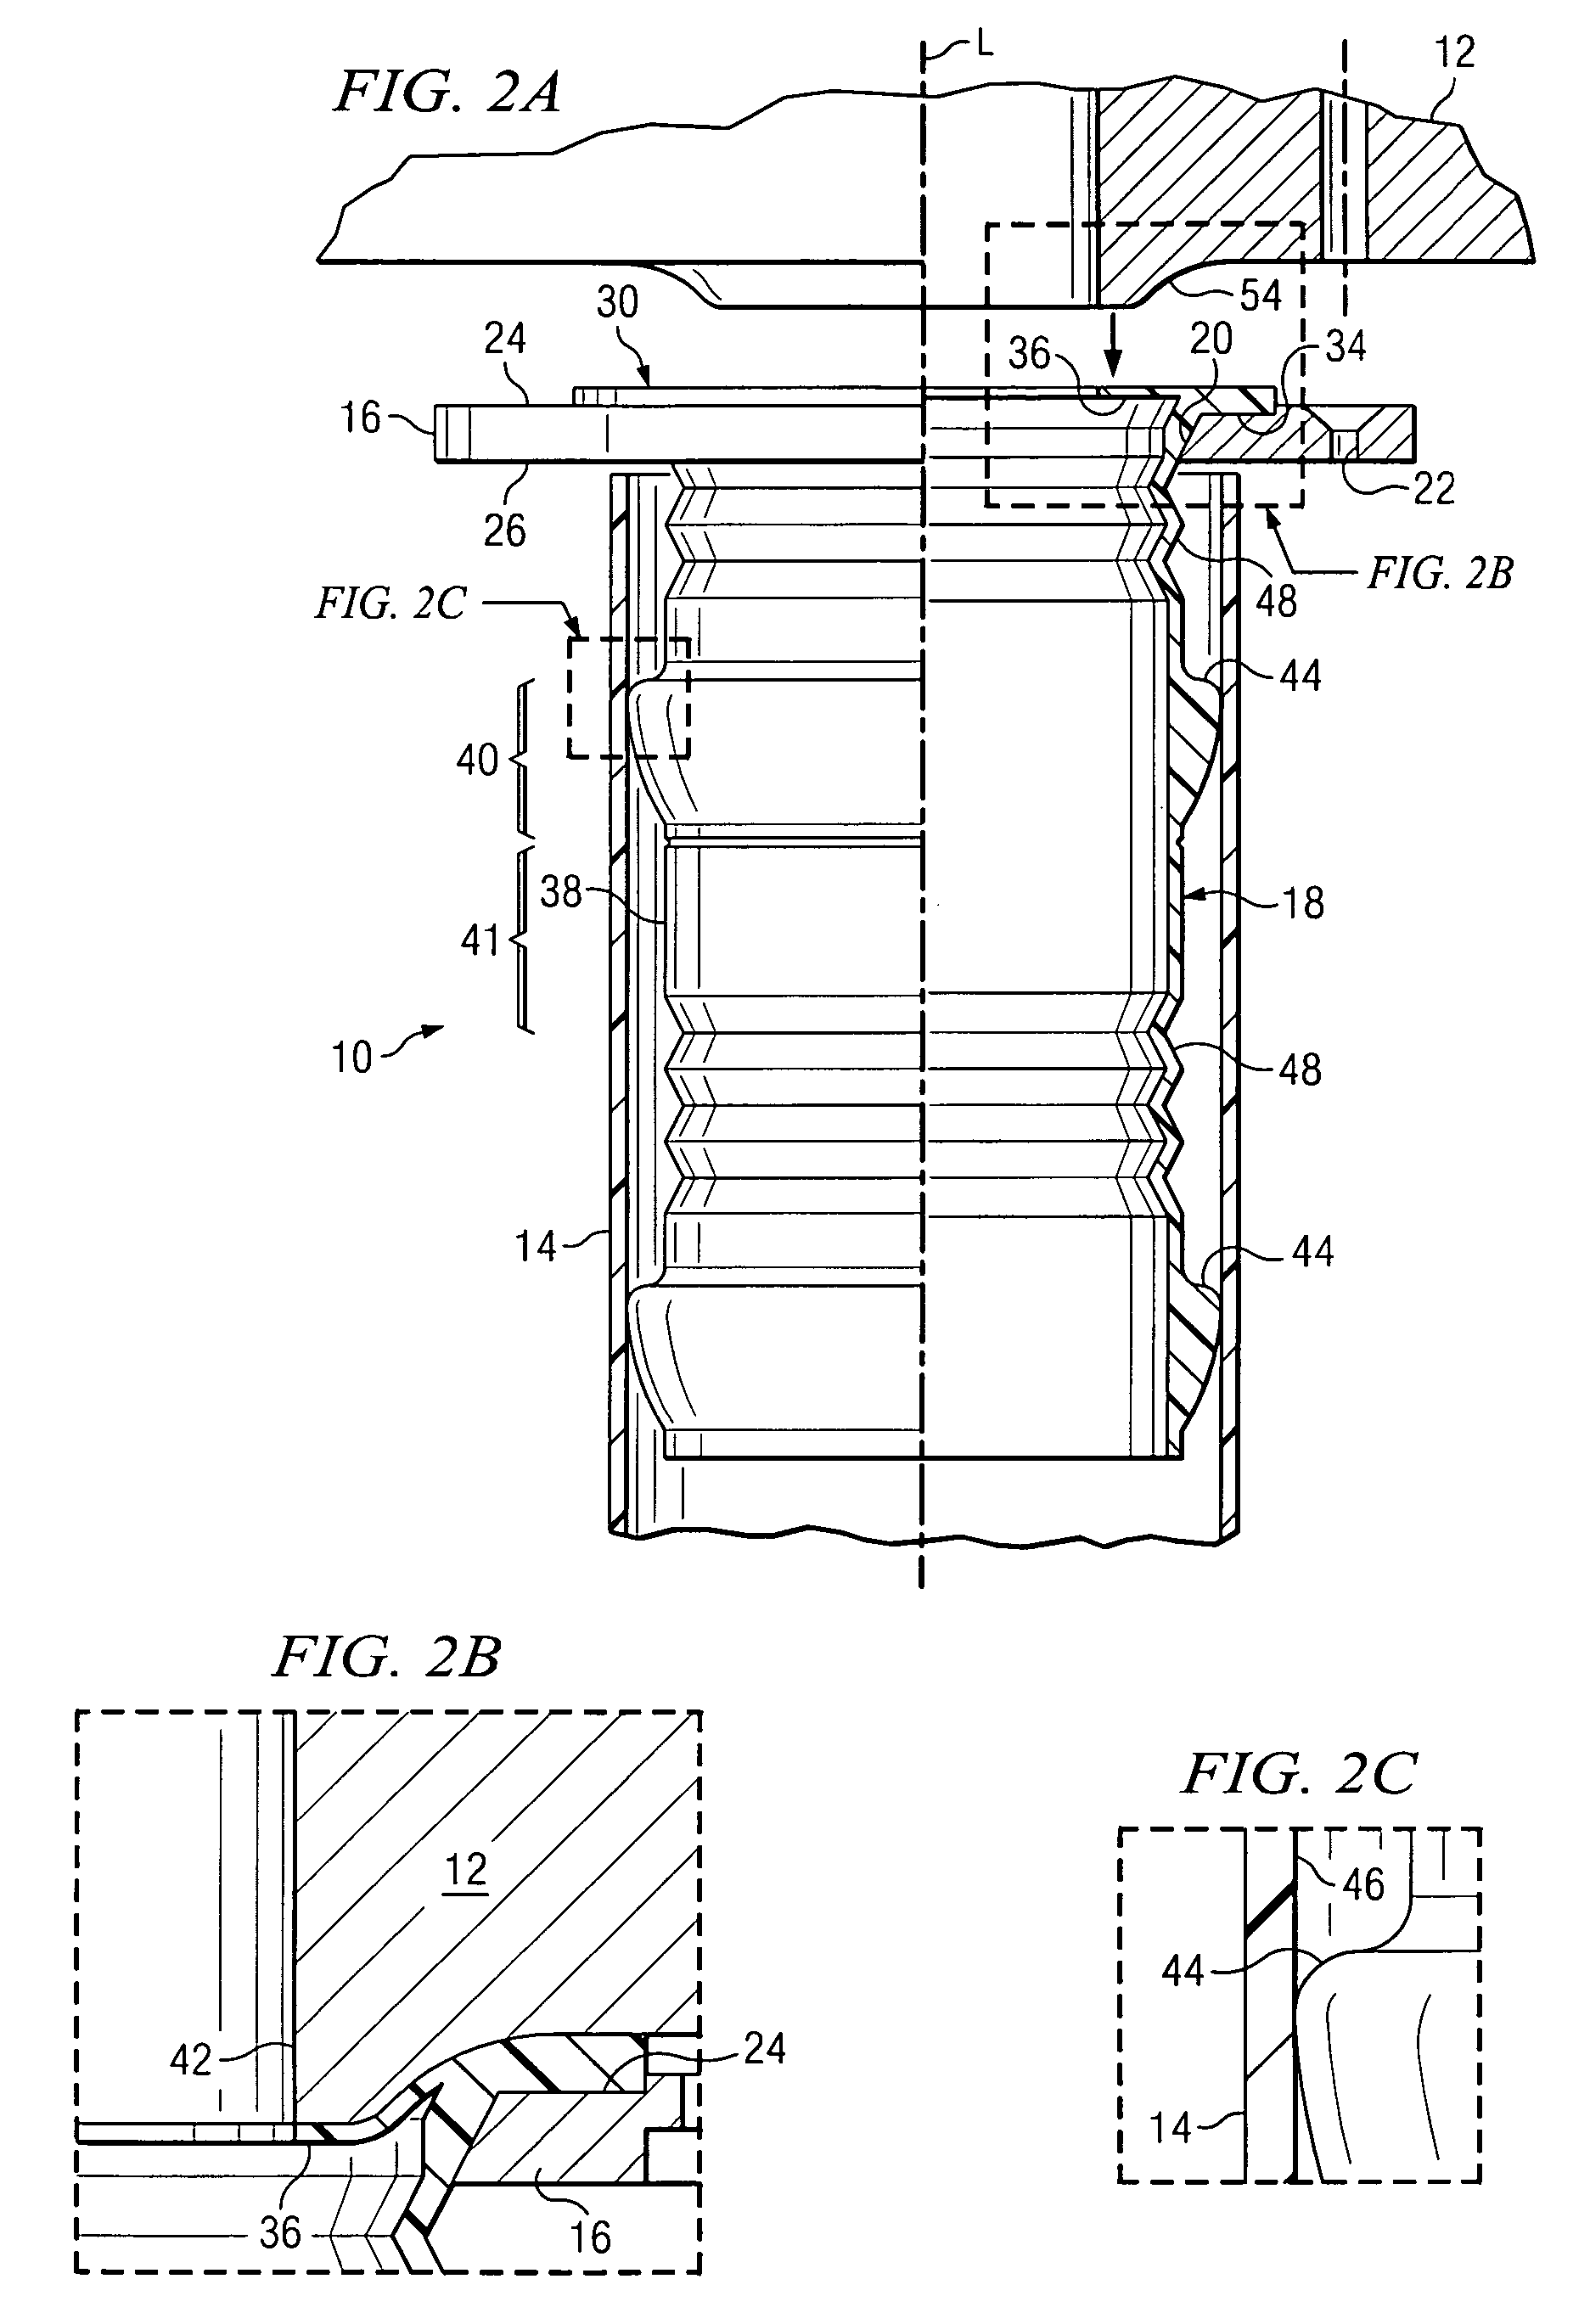 Flexible flange apparatus for connecting conduits and methods for connecting same